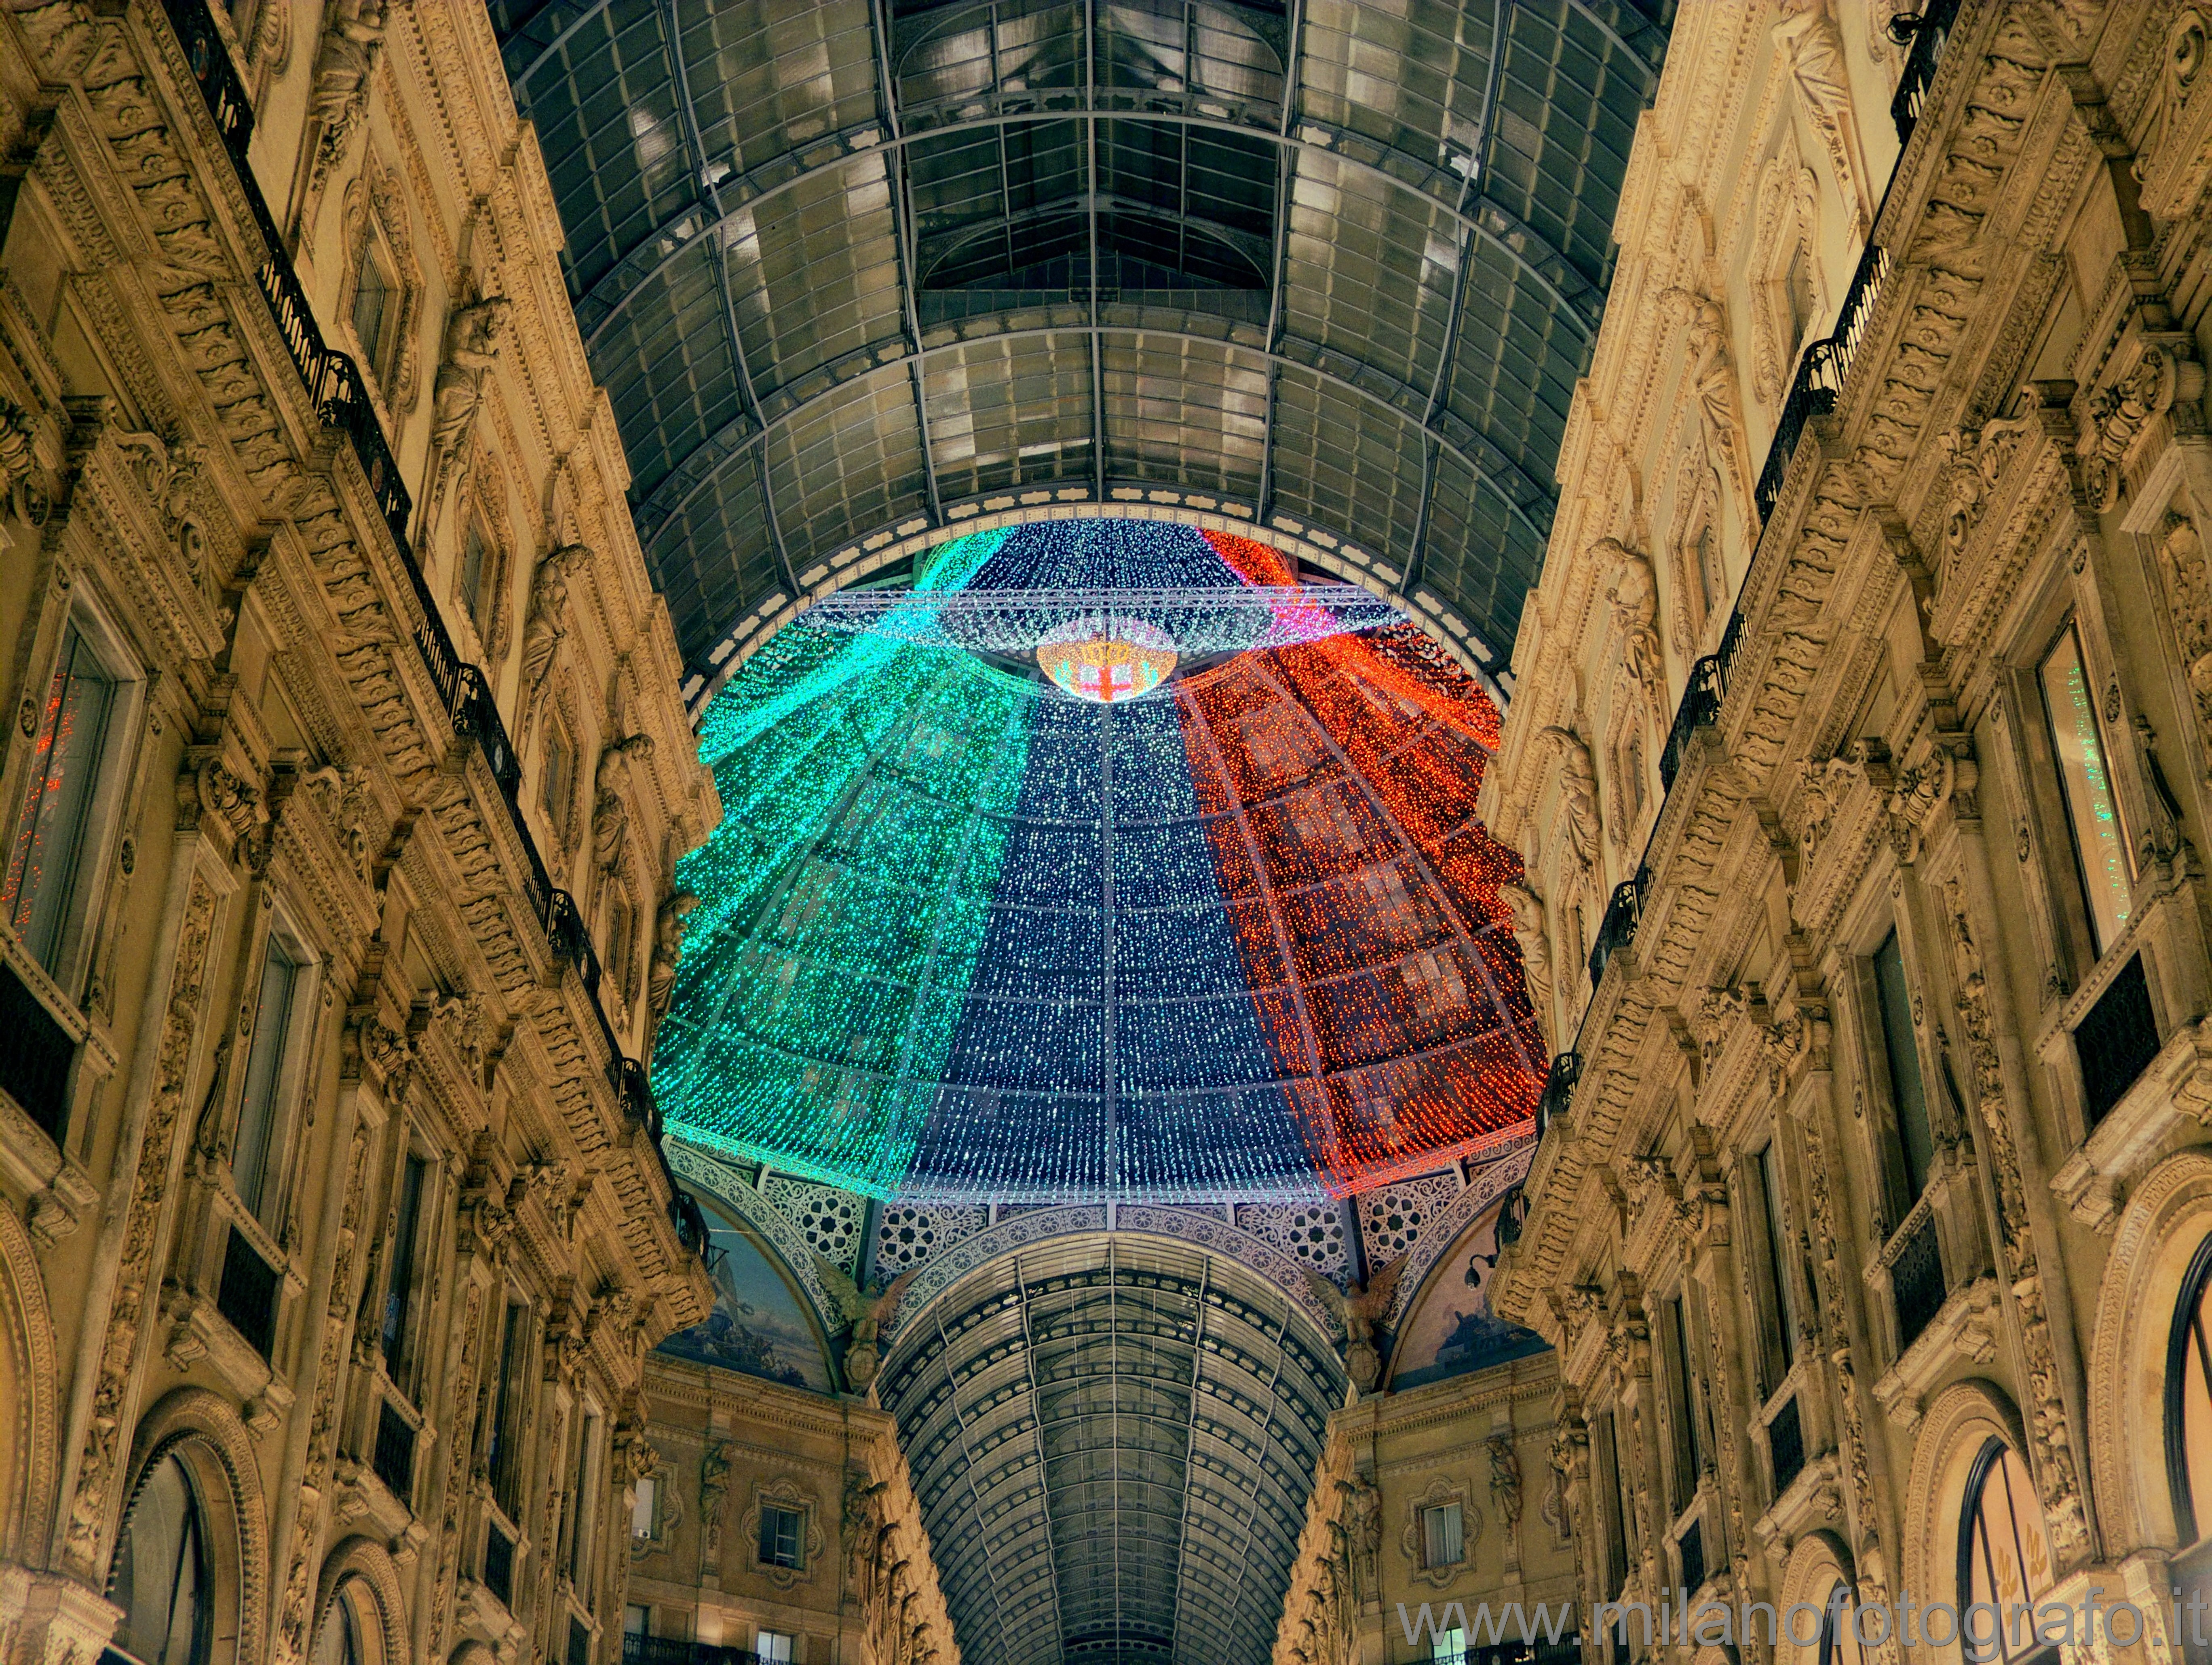 Milan (Italy): The dome of the Galleria decorated with the colors of the Italian flag - Milan (Italy)